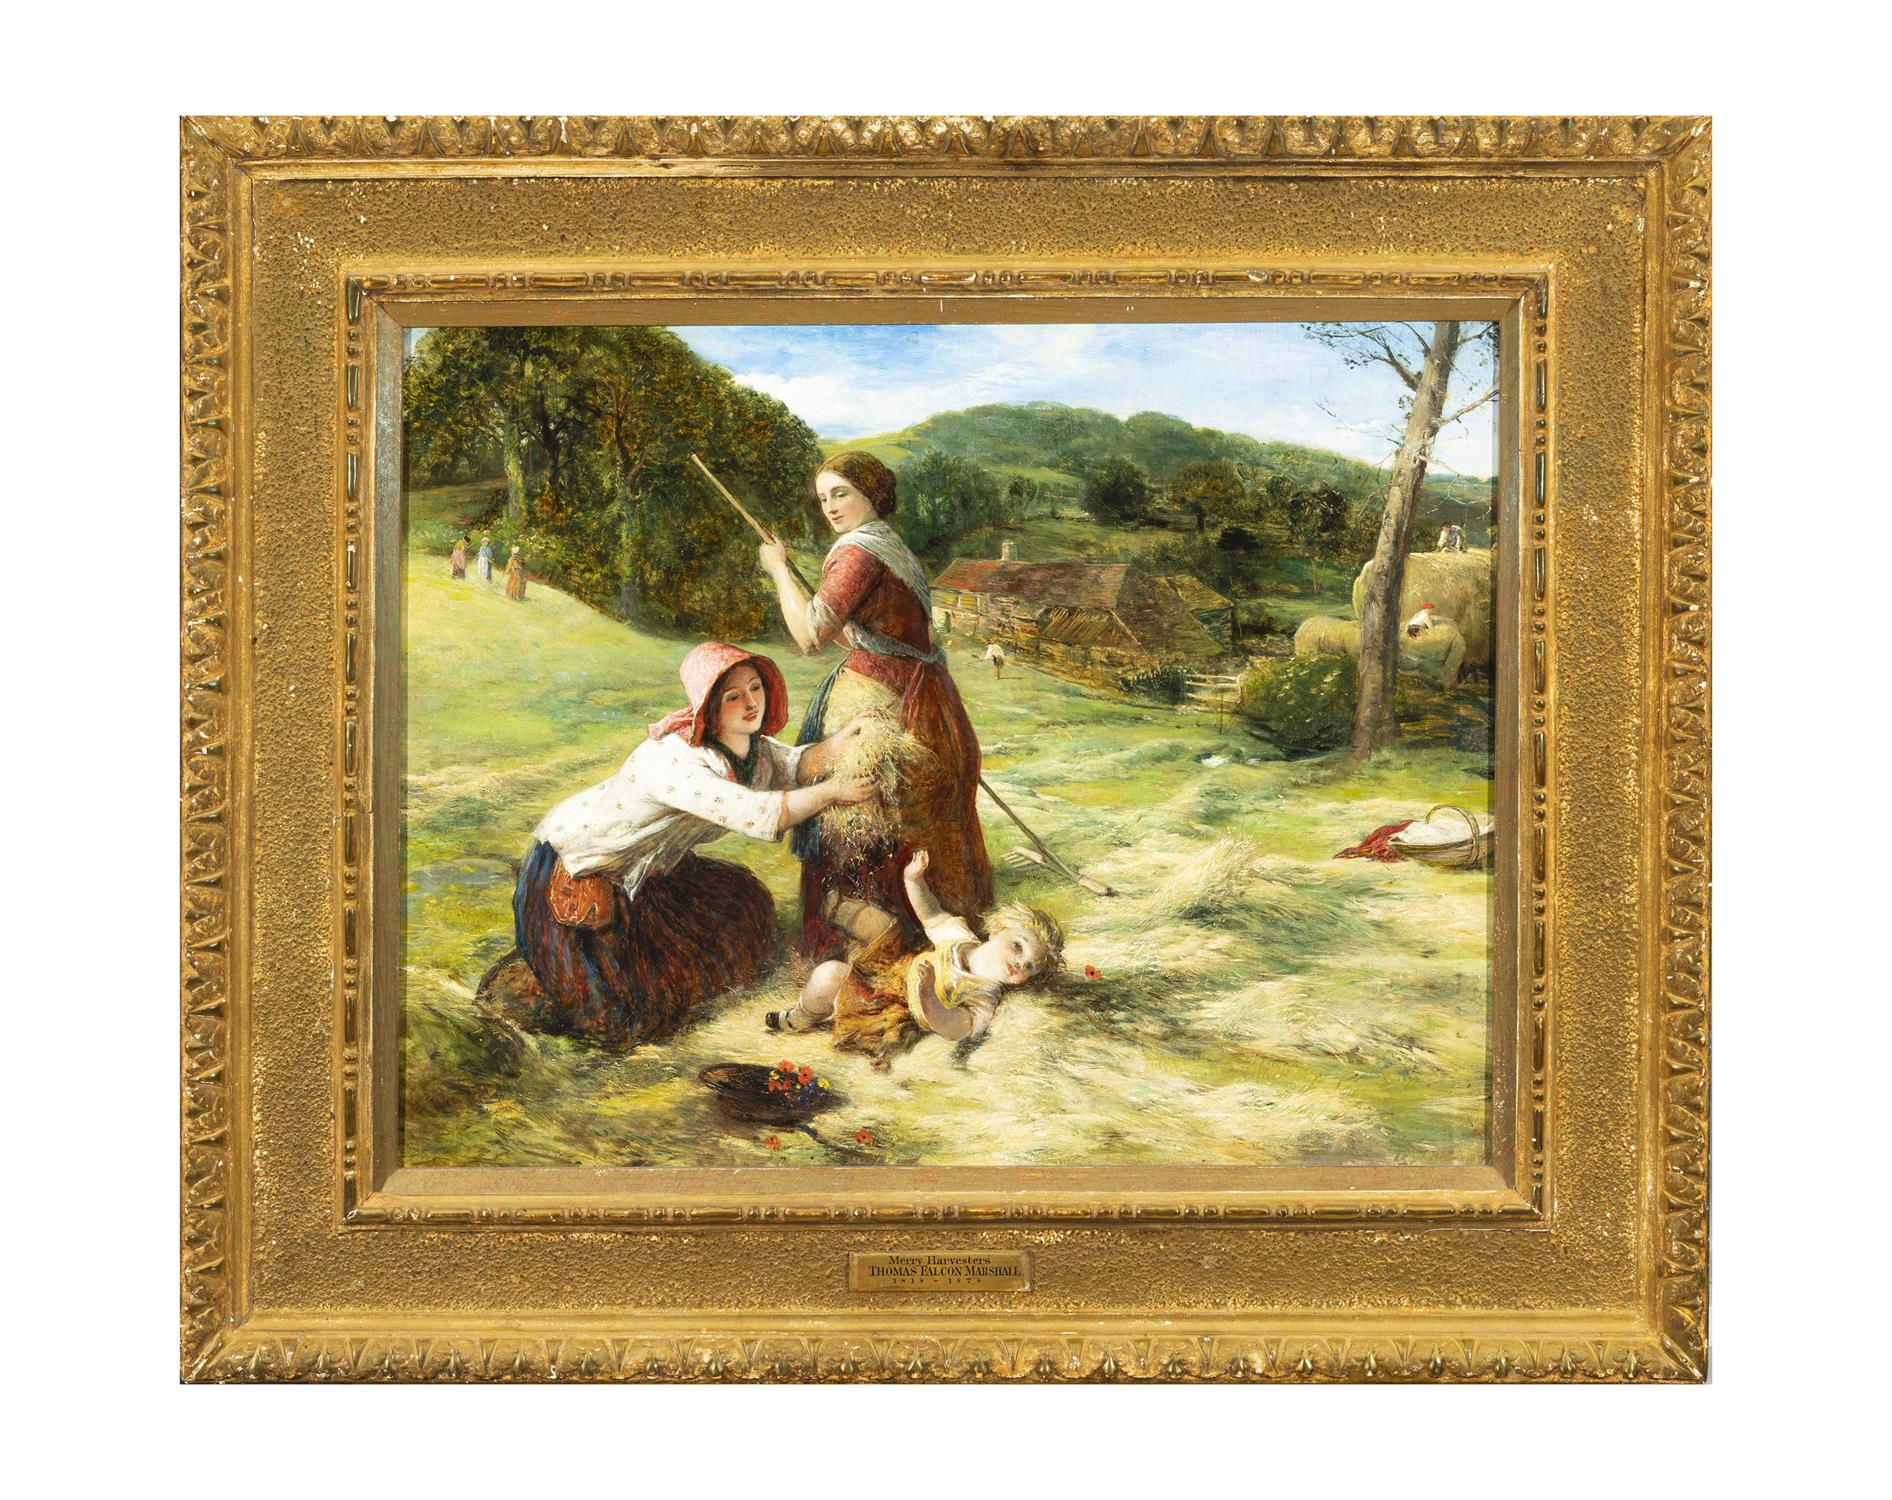 THOMAS FALCON MARSHALL (1818-1878) ‘Merry harvesters’ Oil on canvas, 43x 56 cm Signed lower